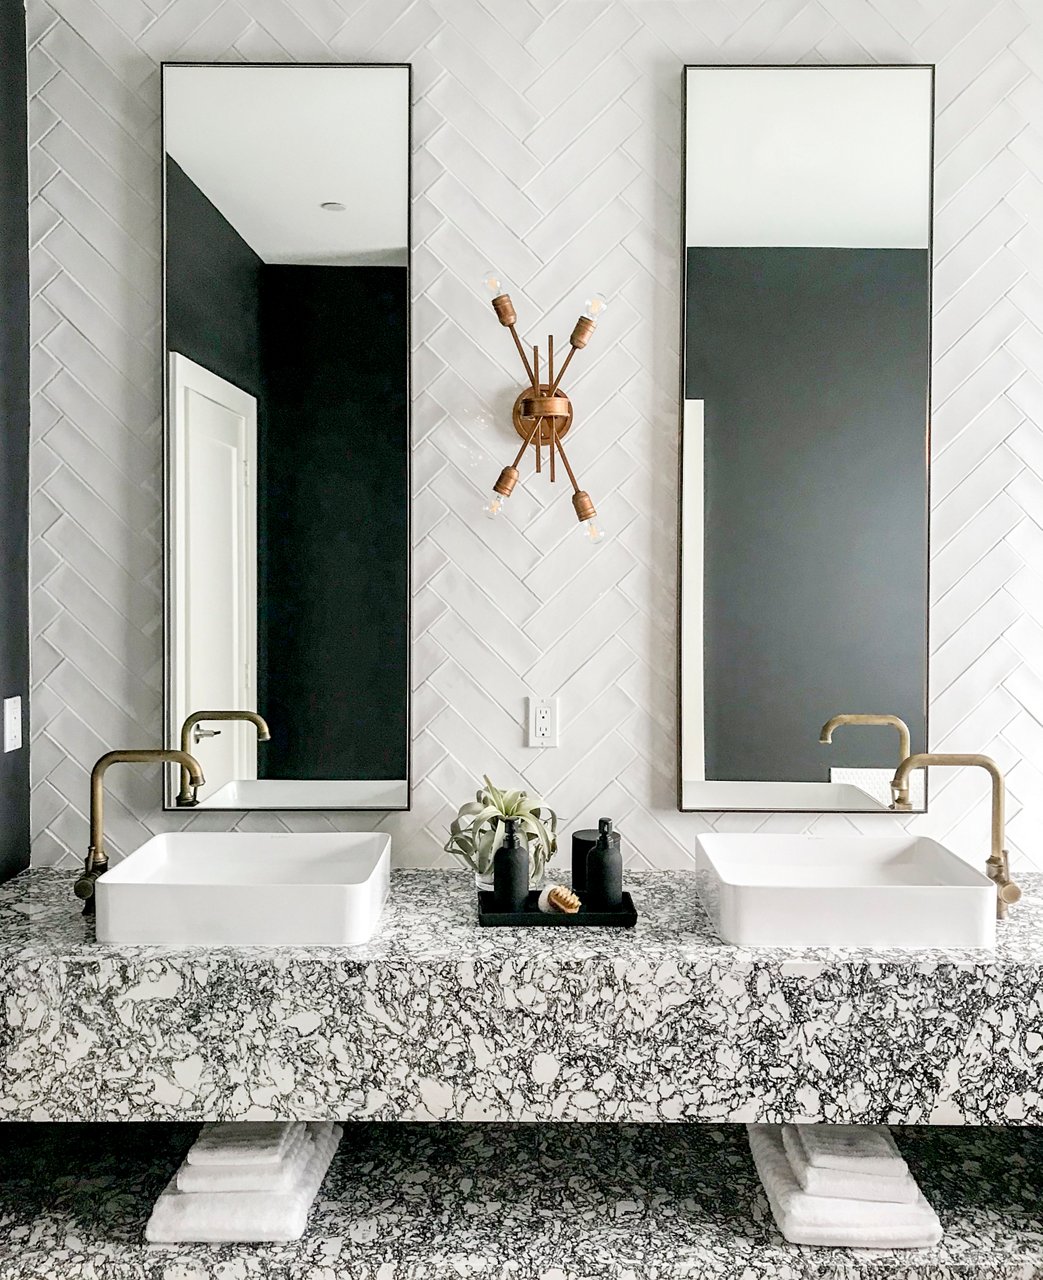 a bathroom with a floating shelf vanity and shelf made from black and white speckled quartz, with two vessel sinks with gold faucets, two long, veritcal mirrors, and white herringbone tile backsplash.